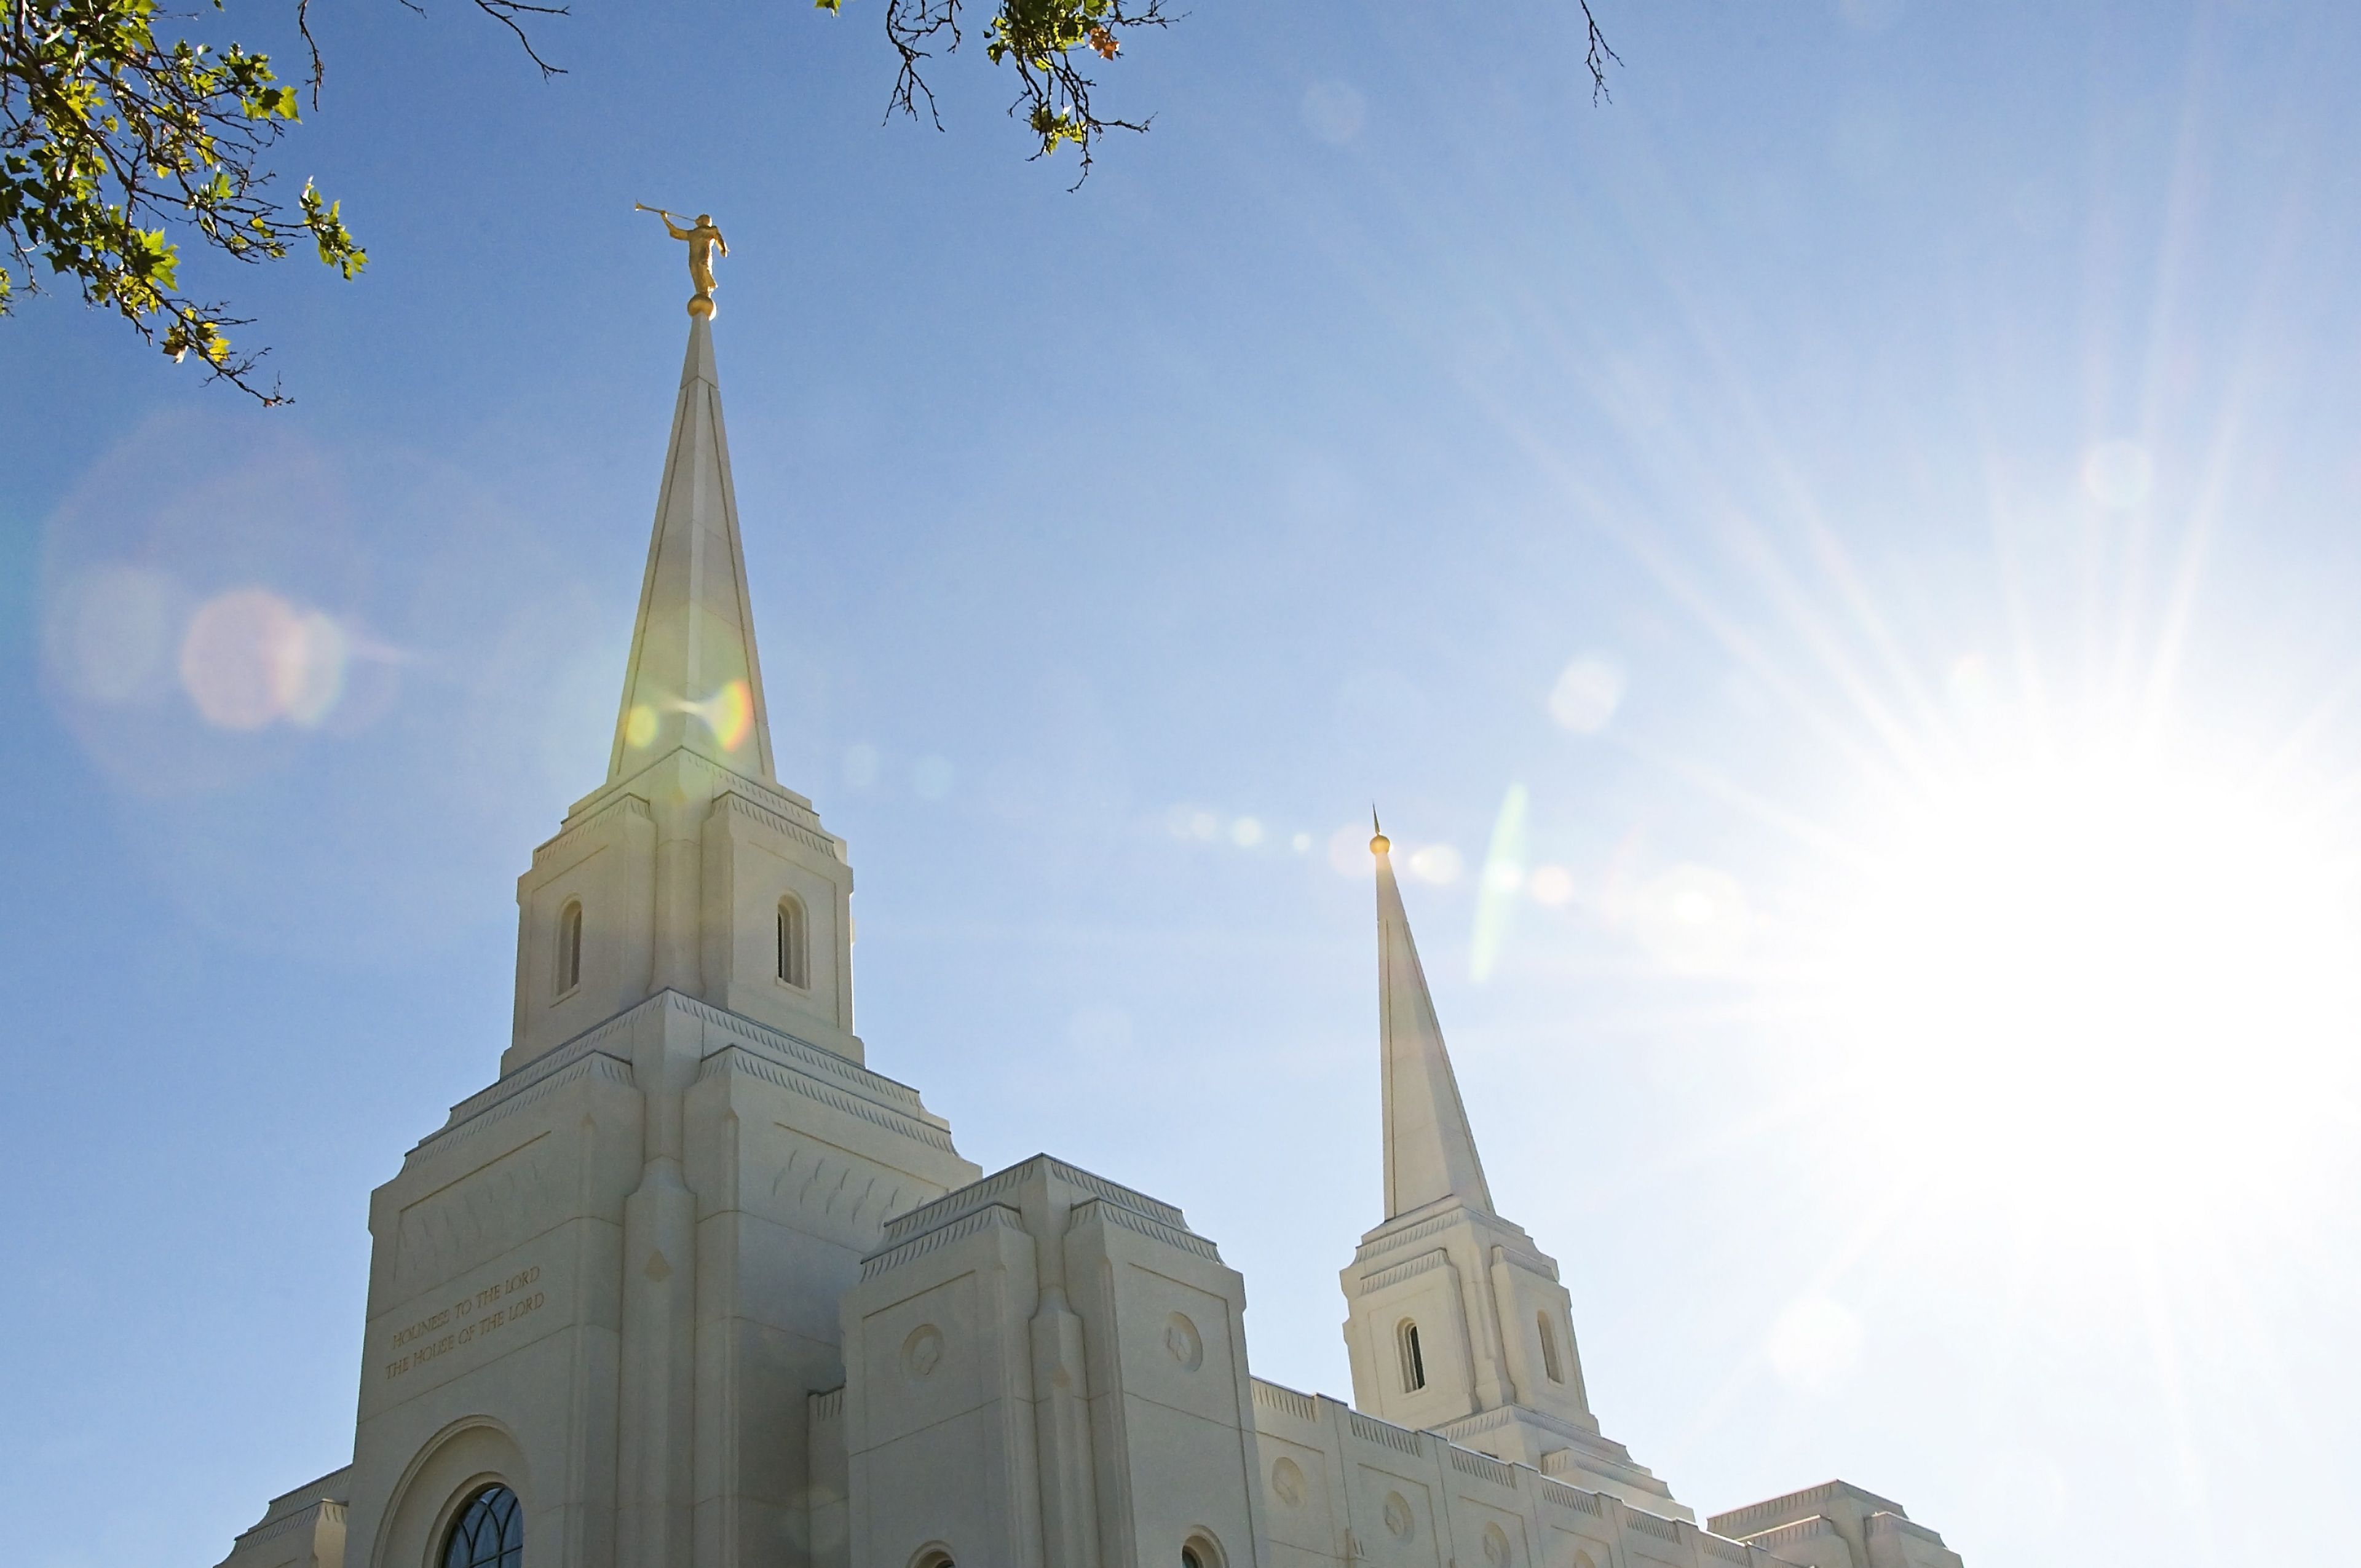 The Brigham City Utah Temple spires in sunlight, including the exterior of the temple.